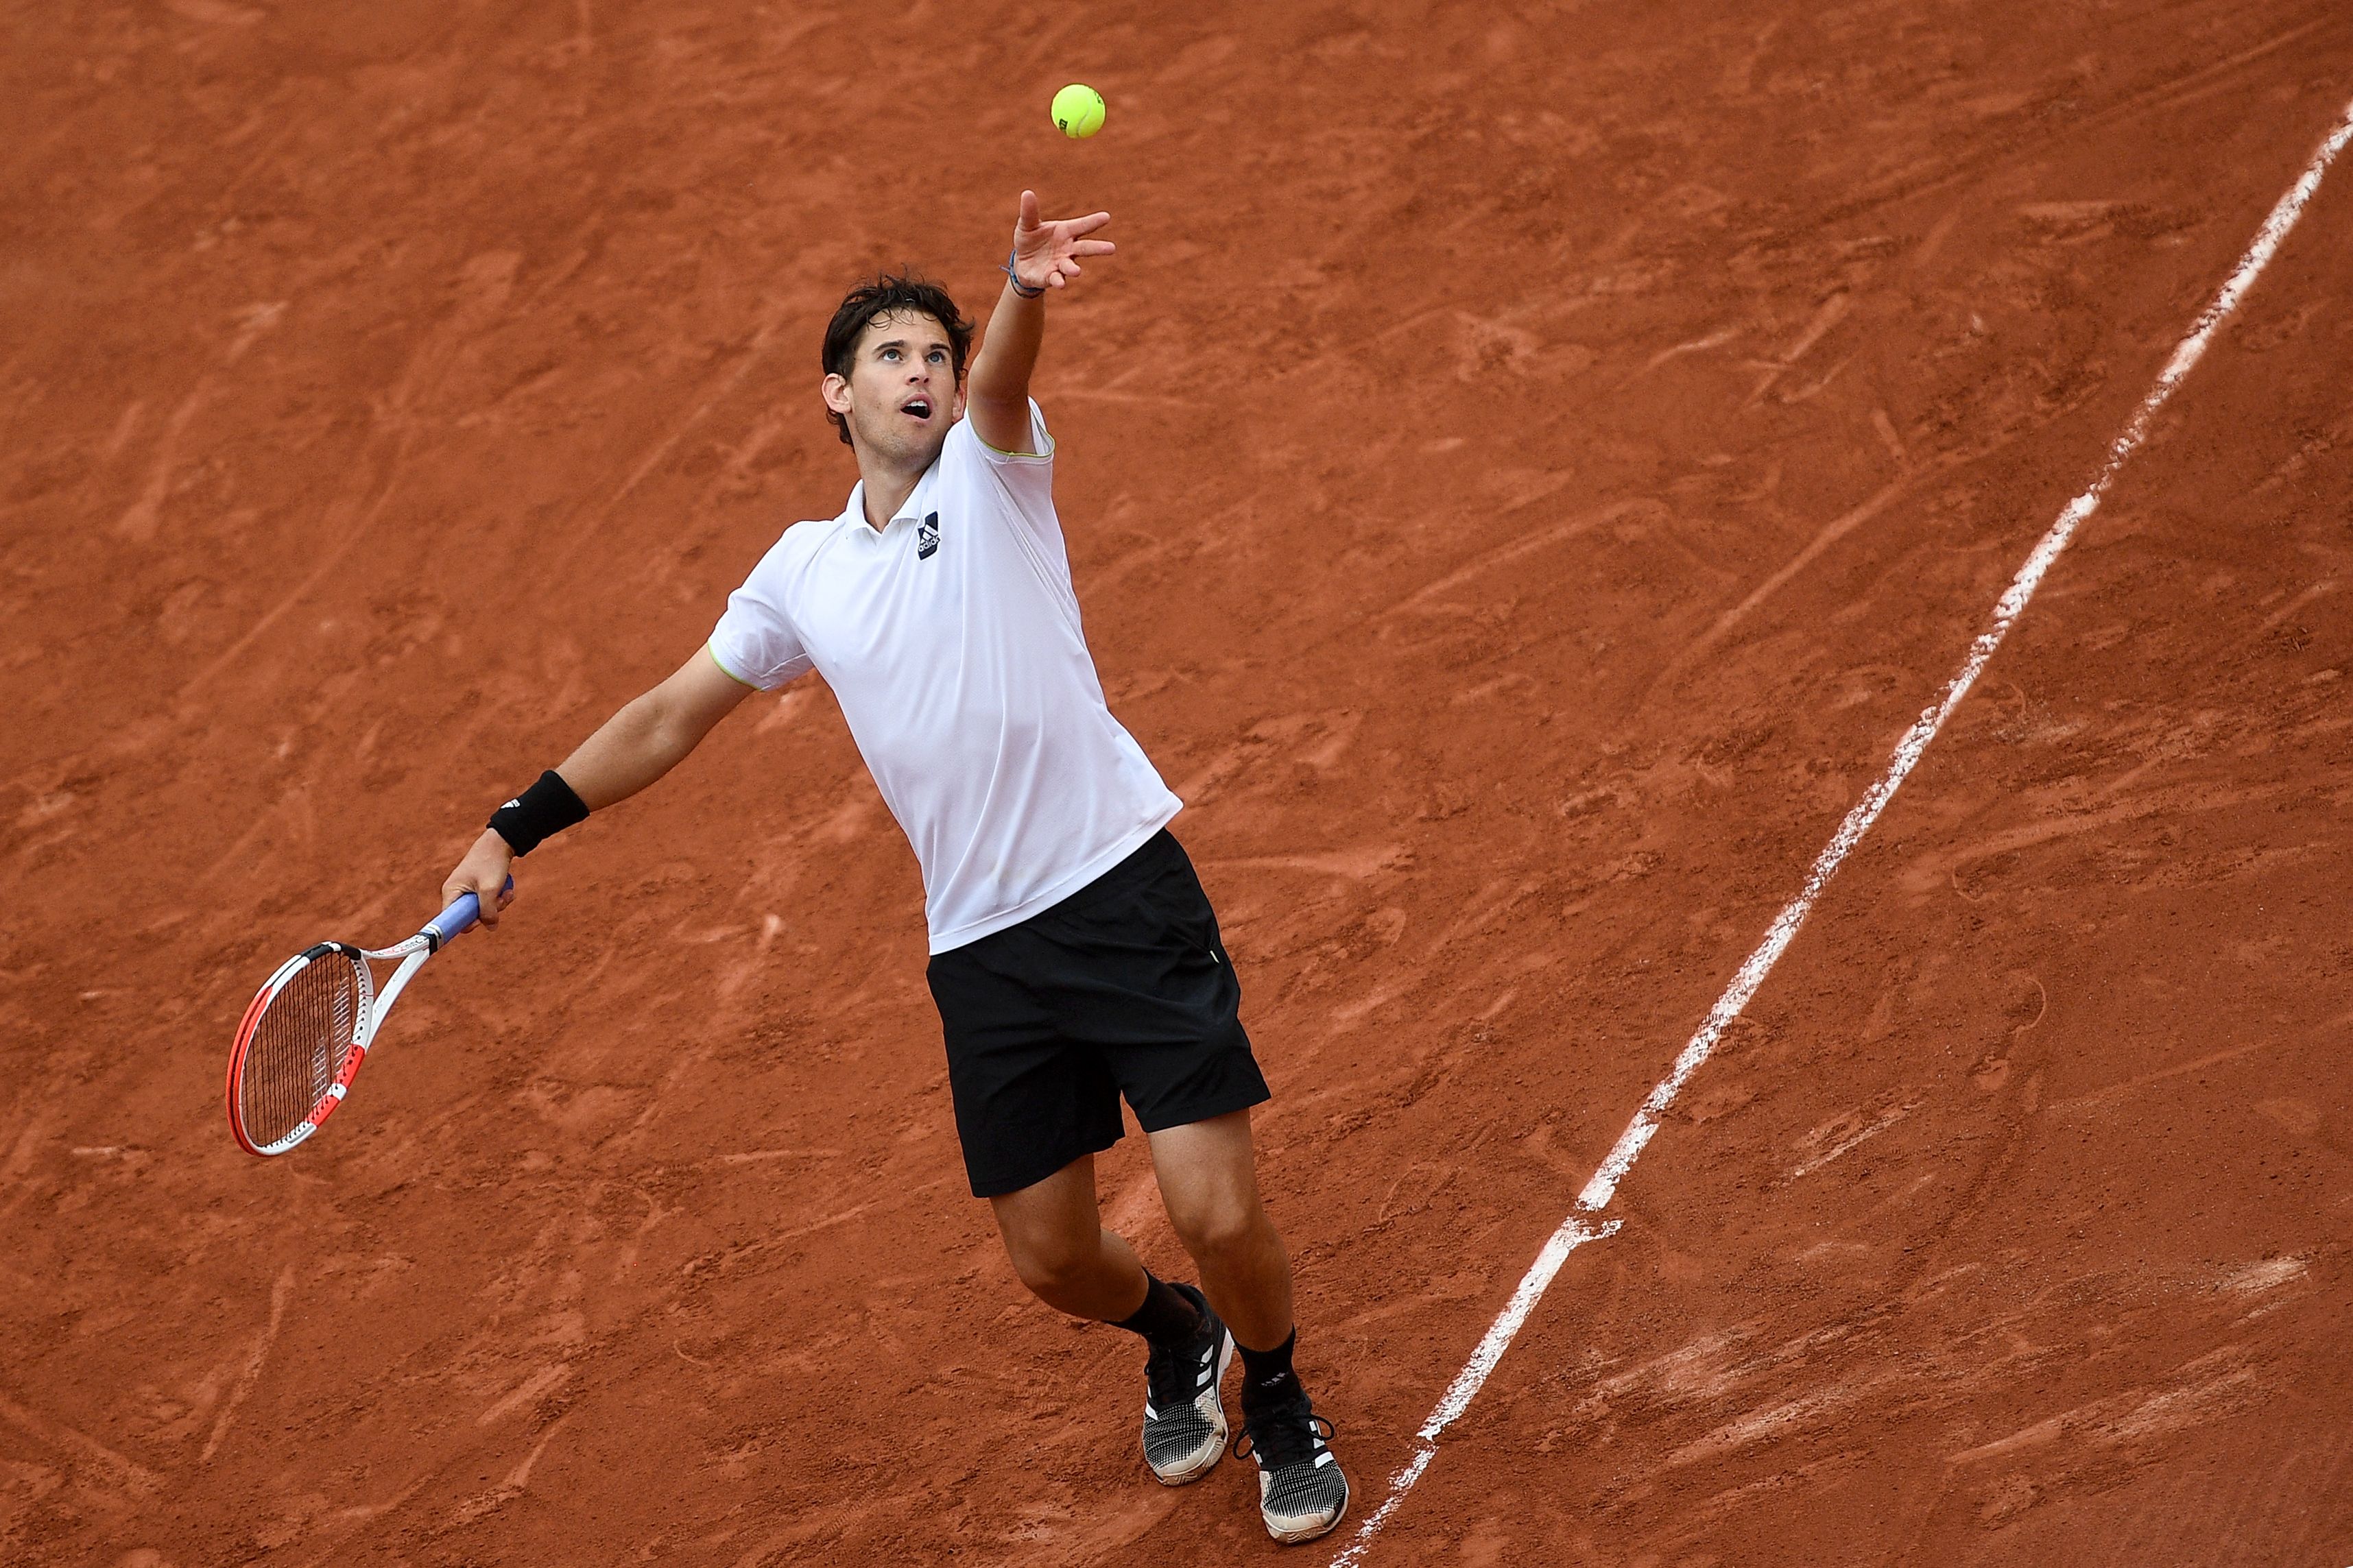 Dominic Thiem gains momentum with back-to-back wins